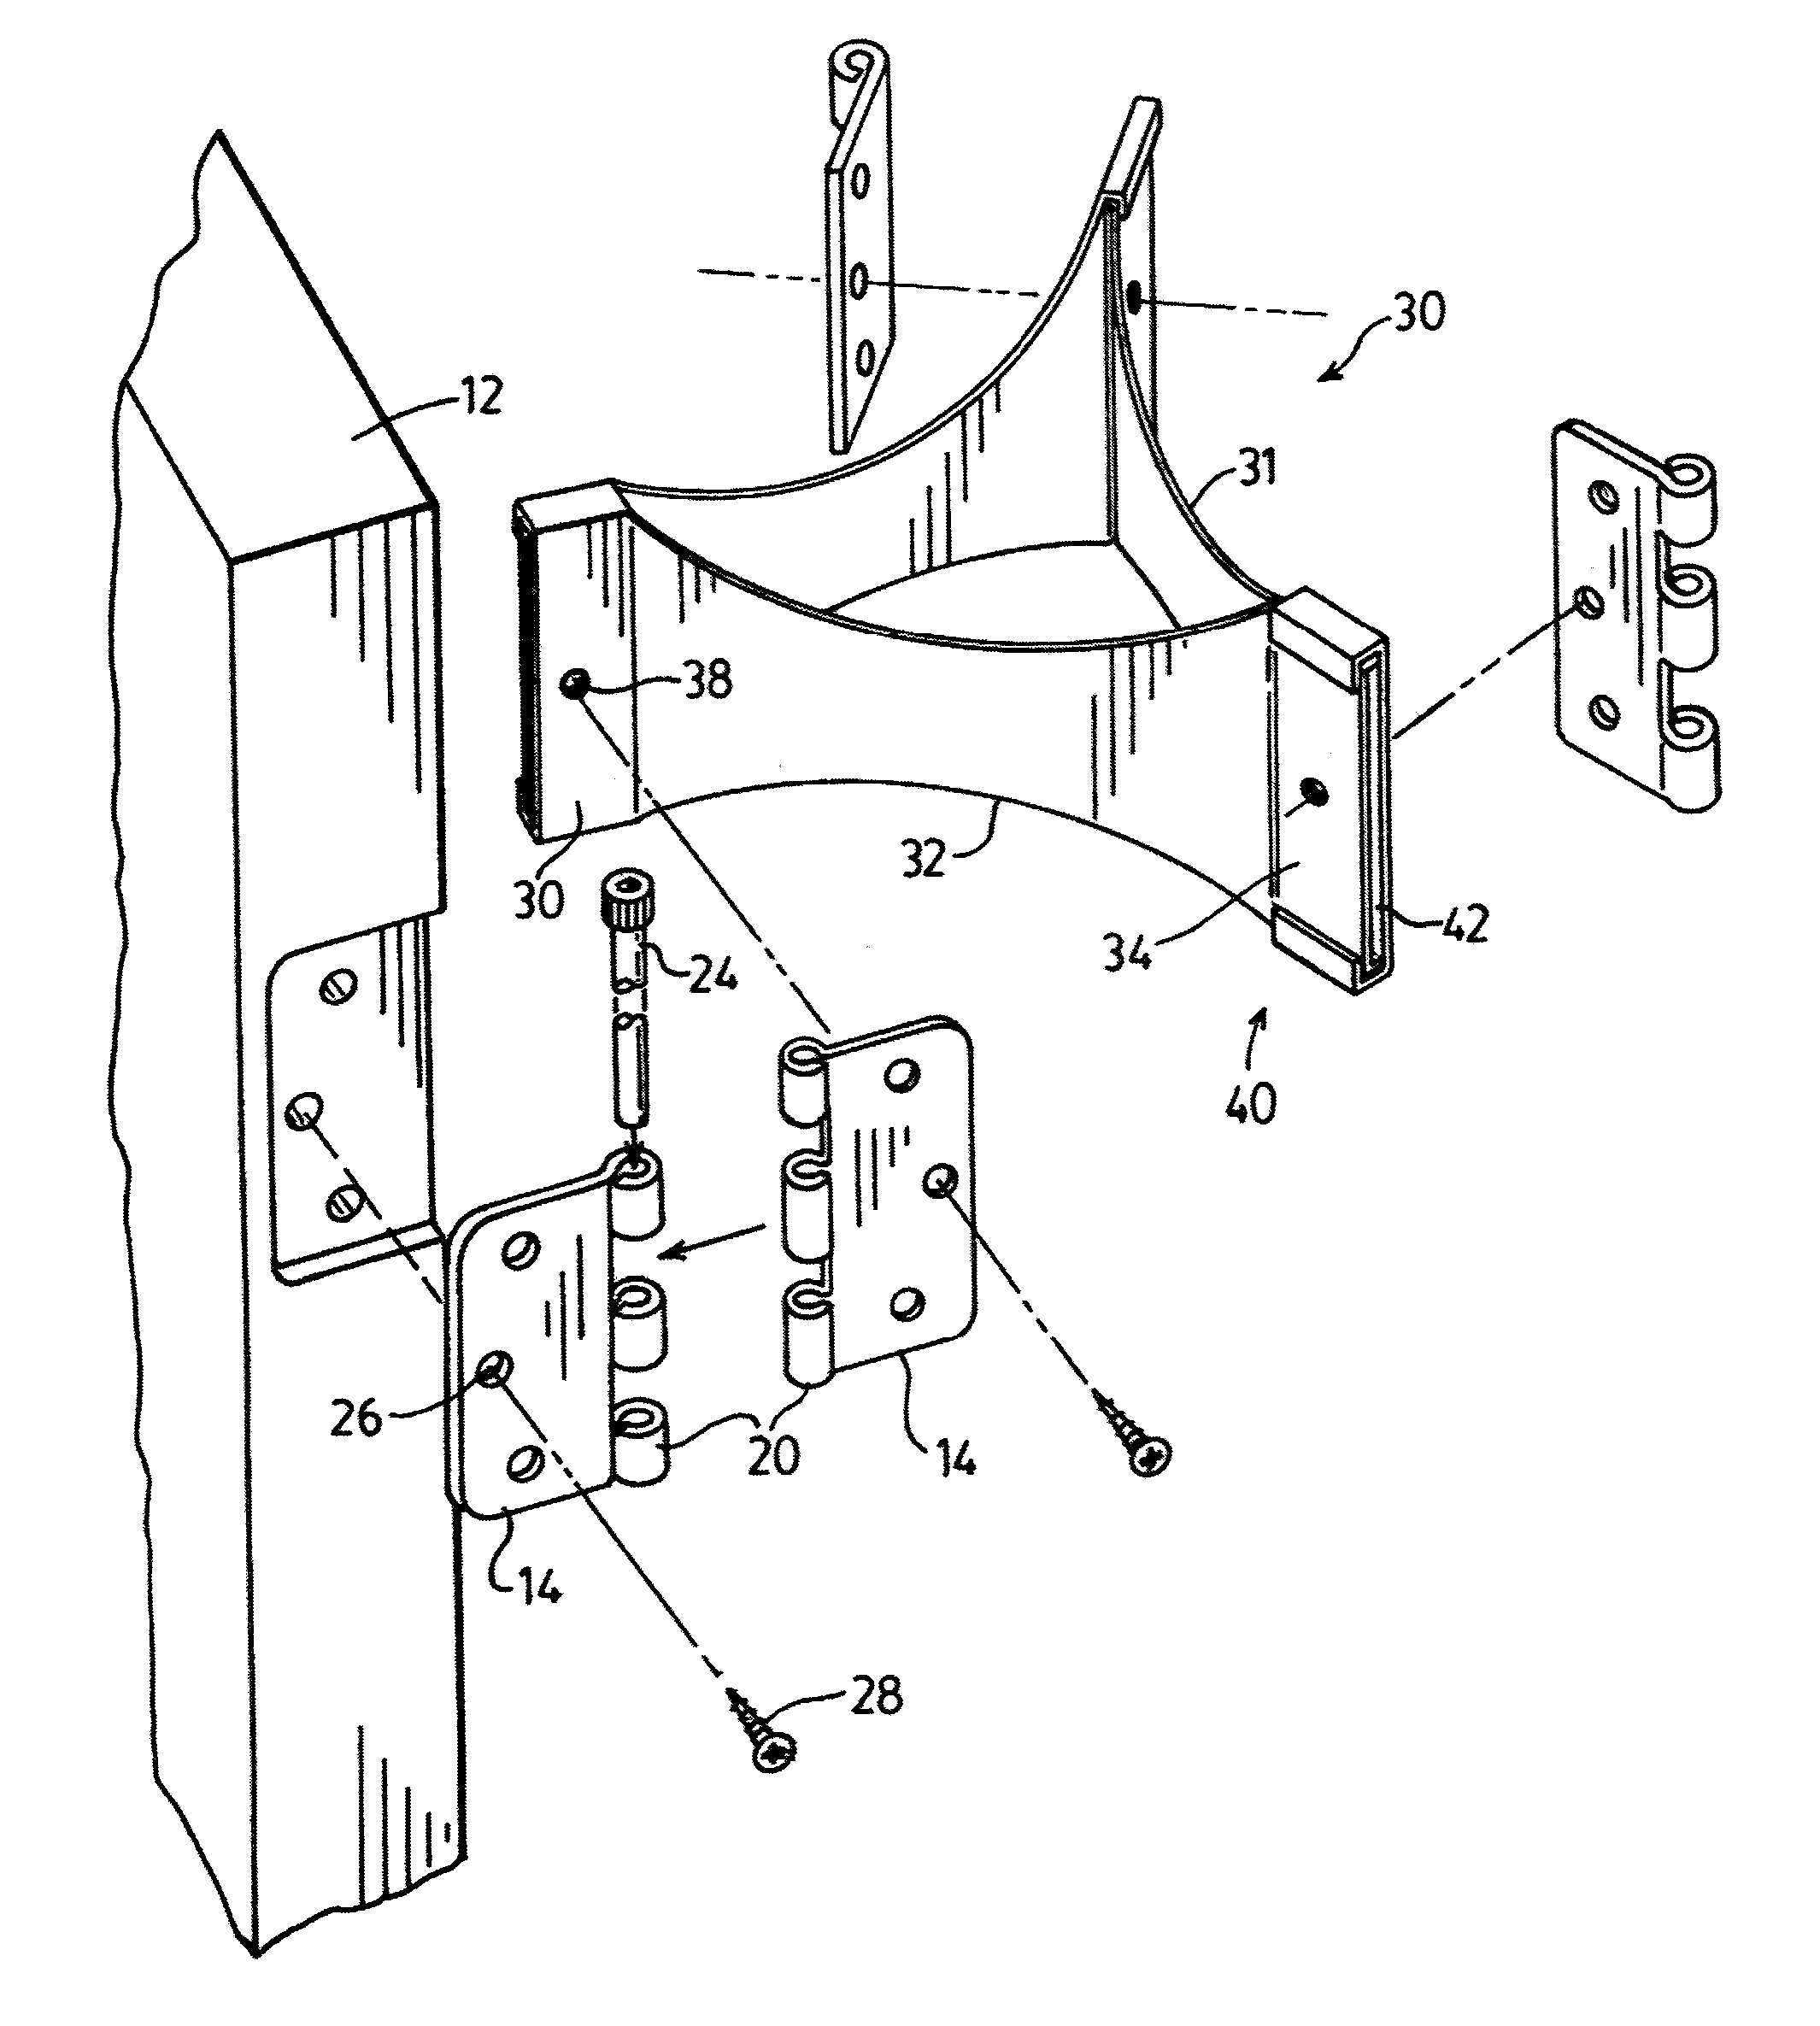 Device, kit, and method for maintaining a plurality of doors in an upright position for treatment